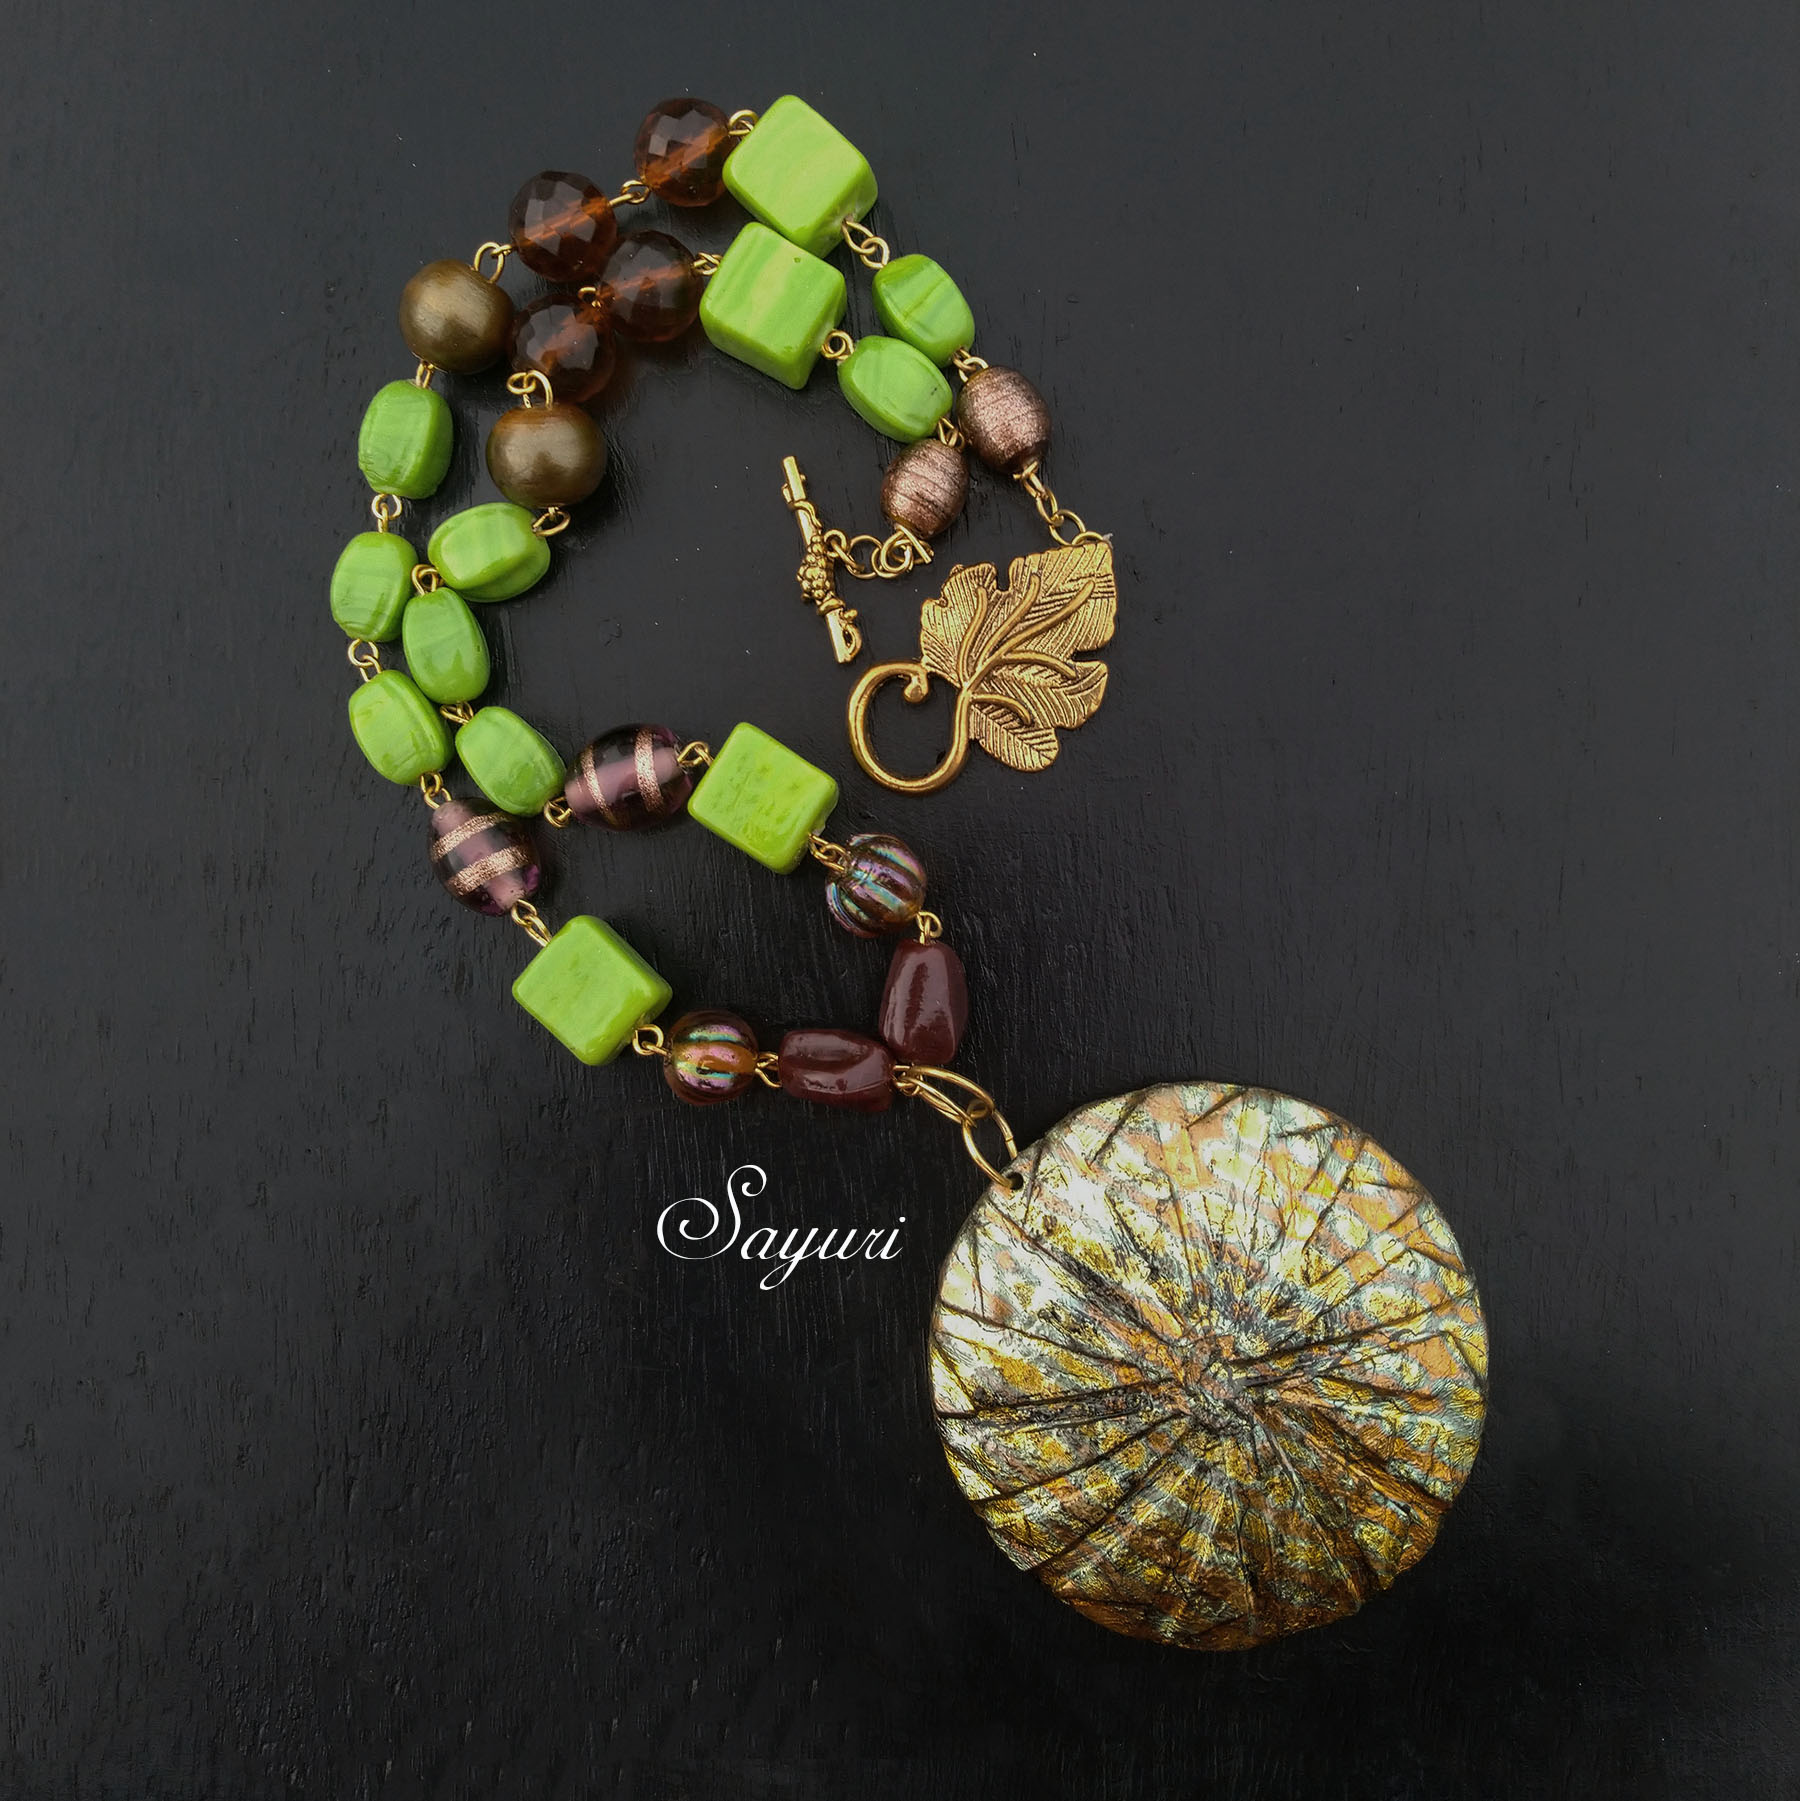 coconut shell necklace and mandala jewellery